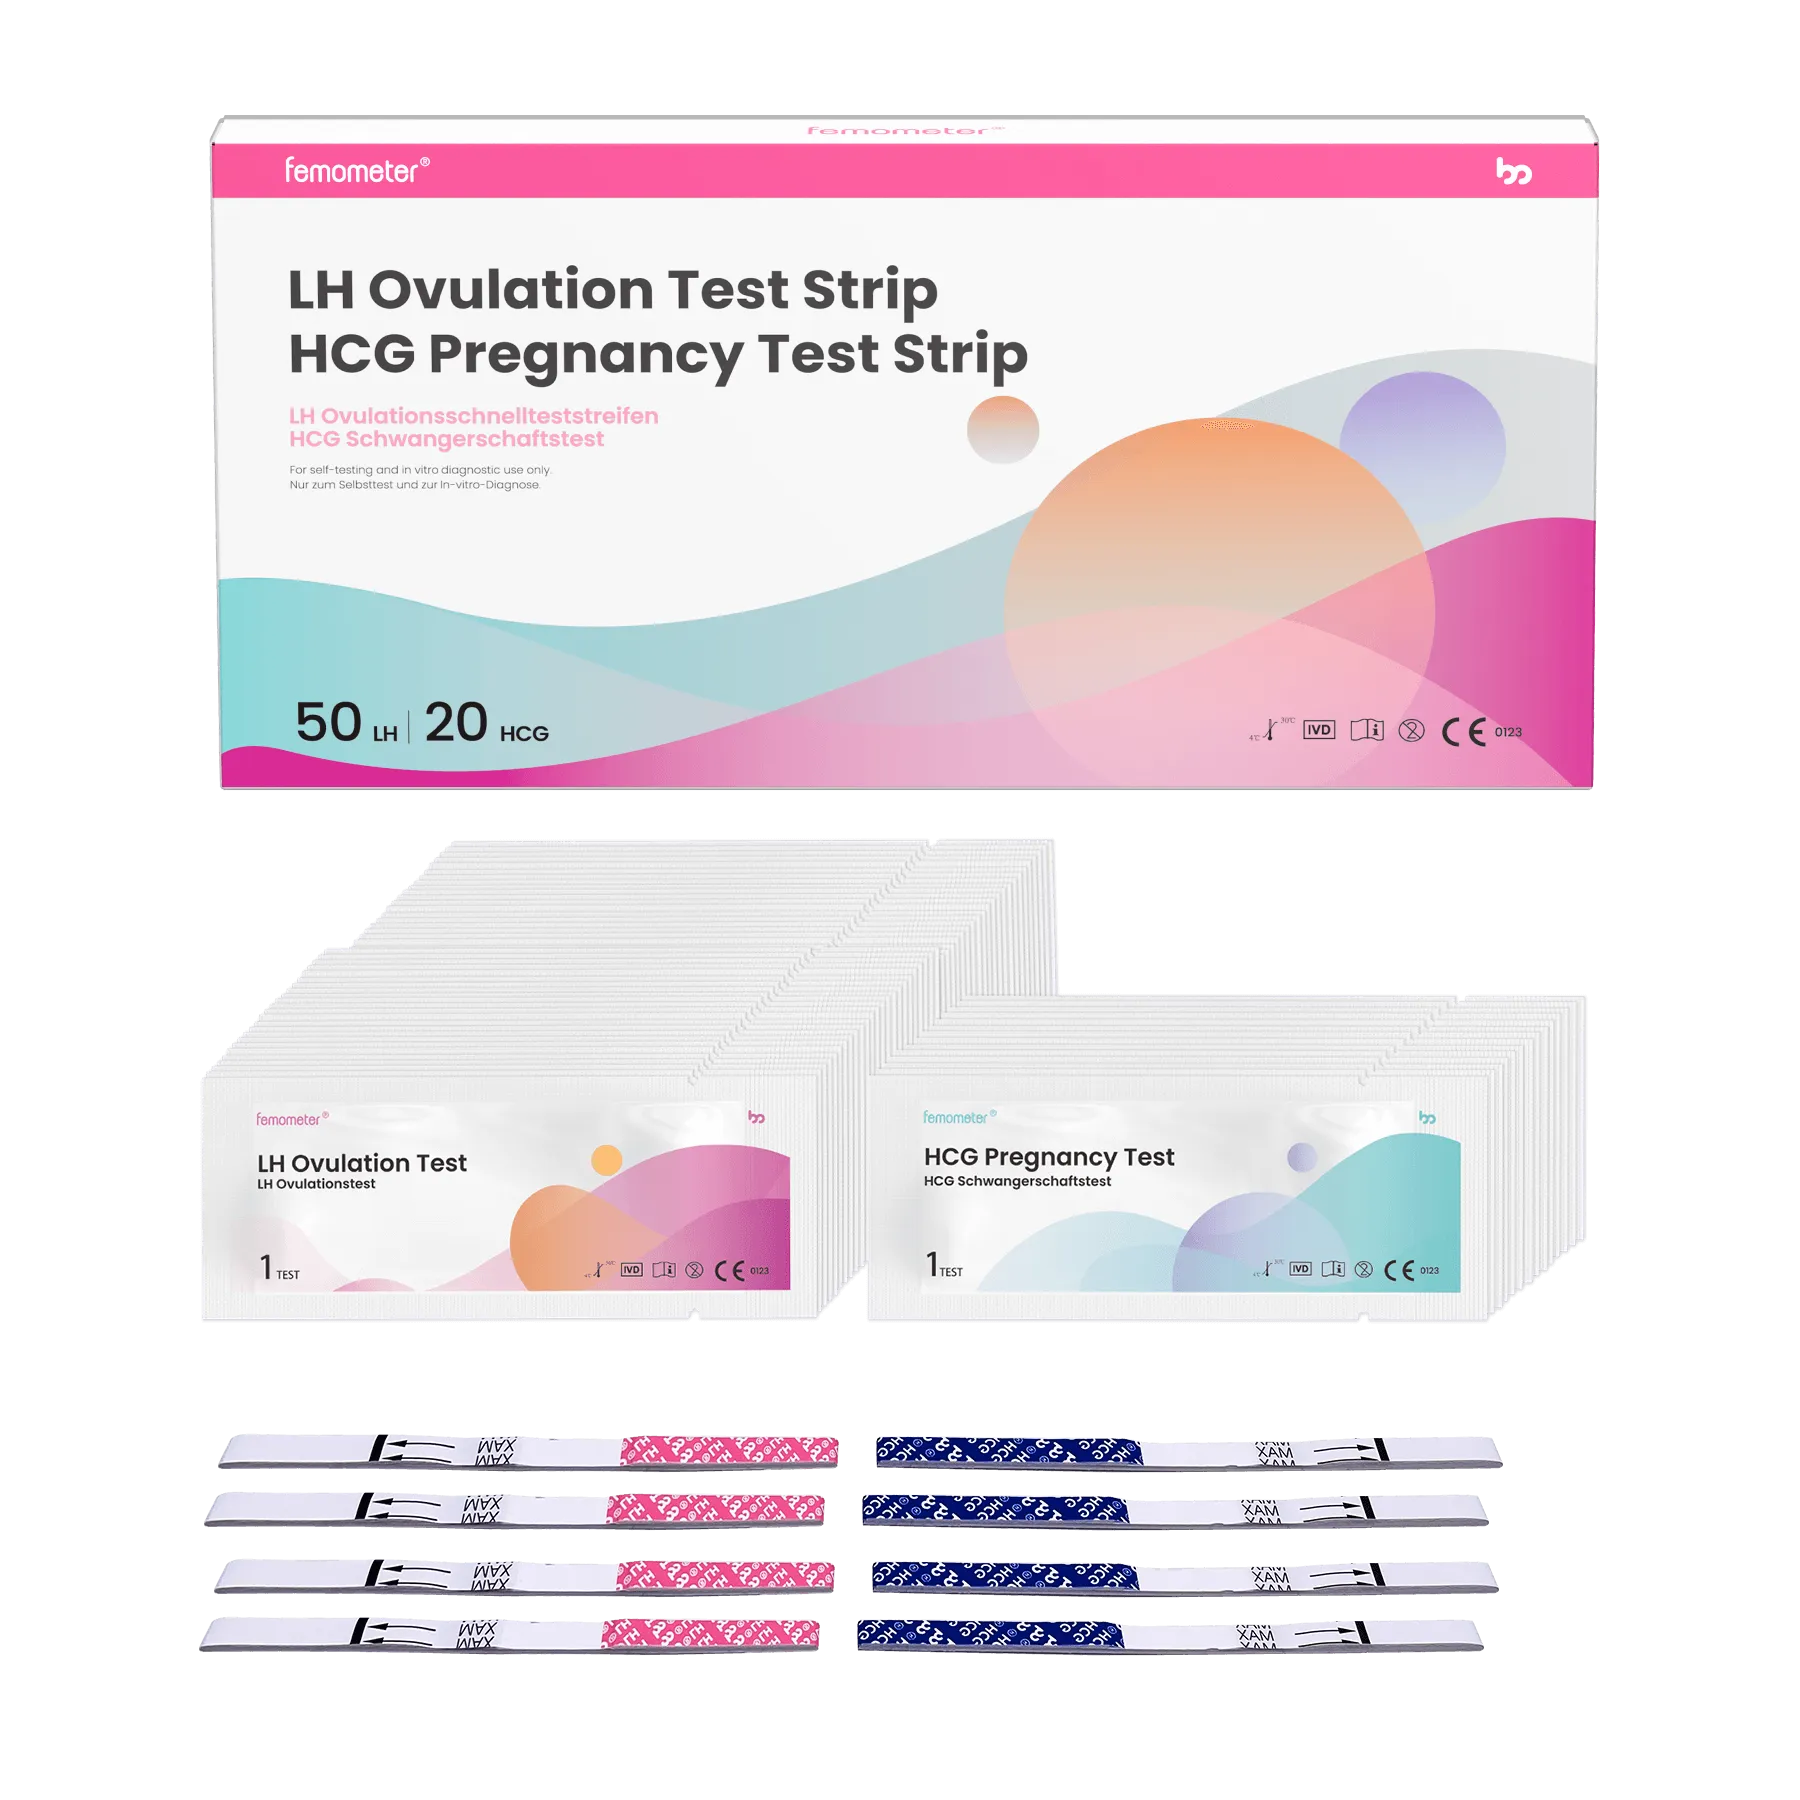  femometer FSH Menopause Test, Highly Sensitive FSH Test Strips,  Help Understand Your Ovarian Reserve, Determine Your Fertility and Detect  Menopause, Includes 6 FSH Tests, 1* User Manual, 1* Urine Cup 